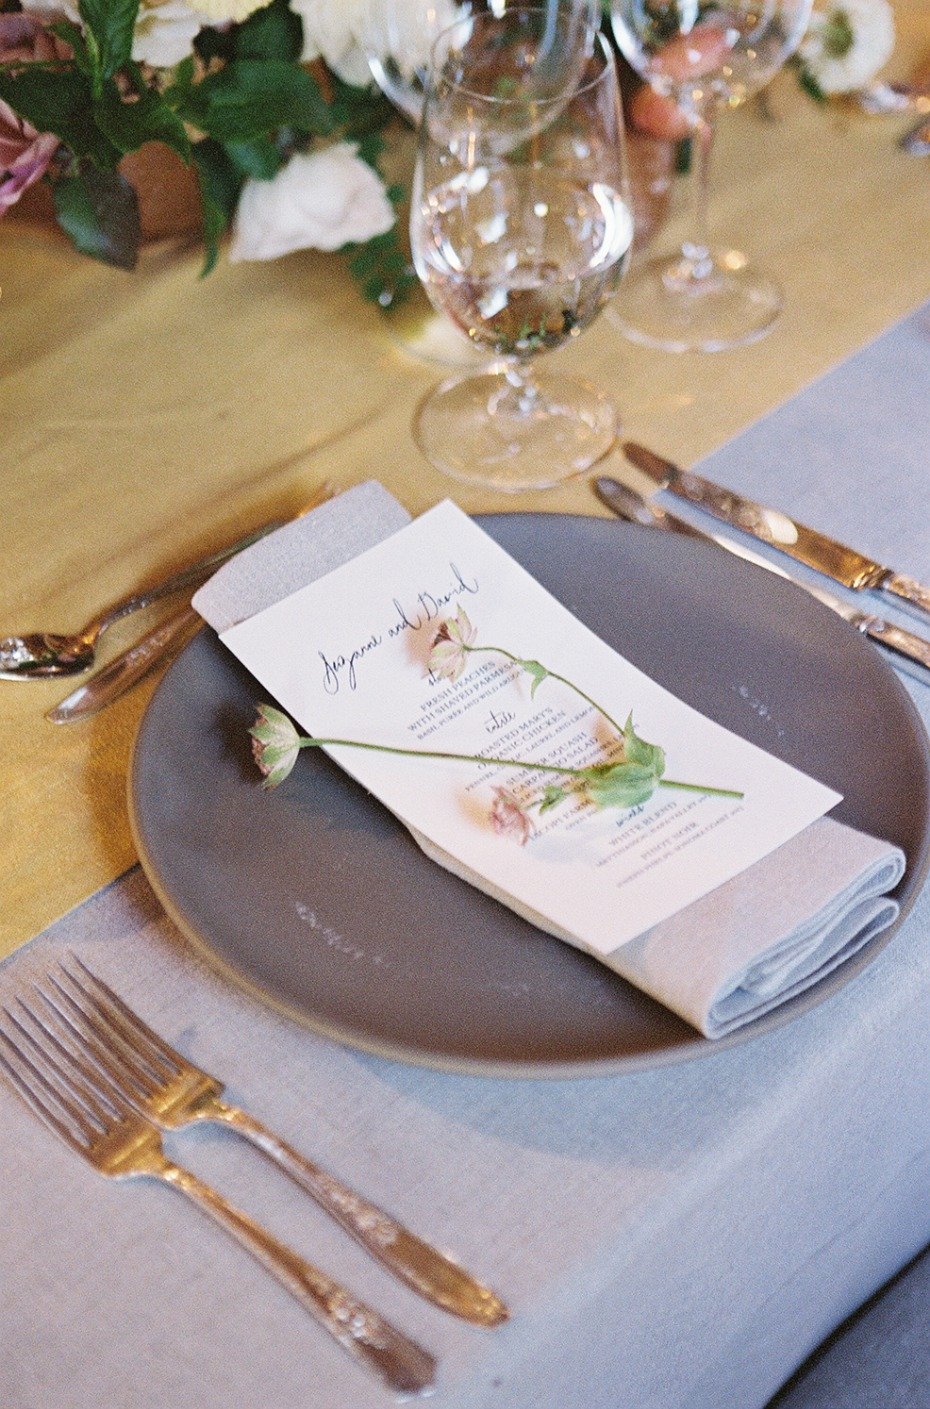 Simple place setting with flower